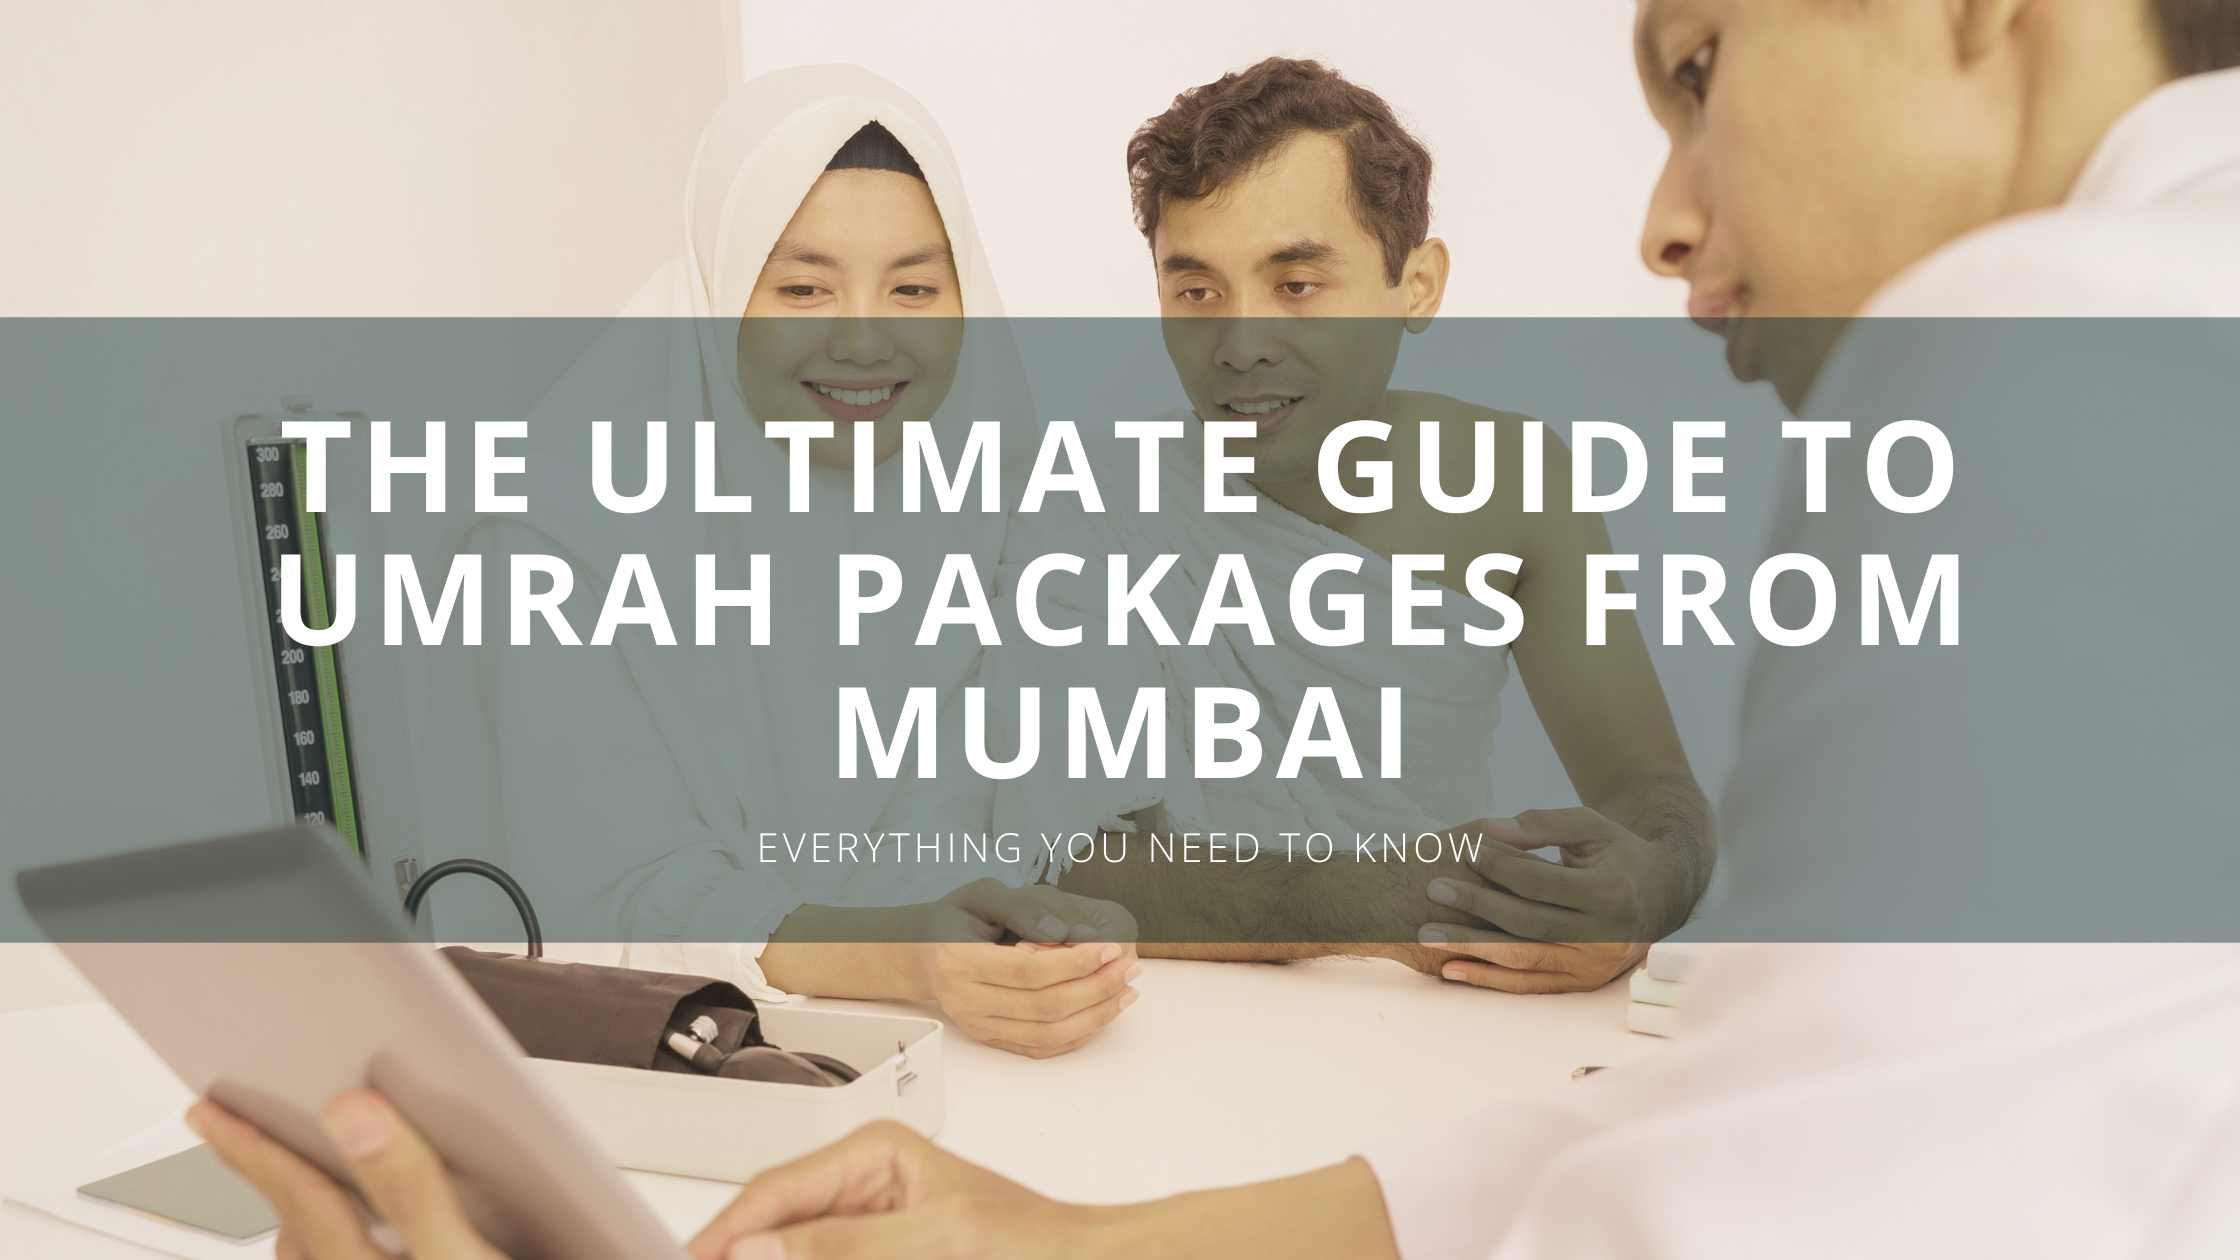 The Ultimate Guide to Umrah Packages from Mumbai